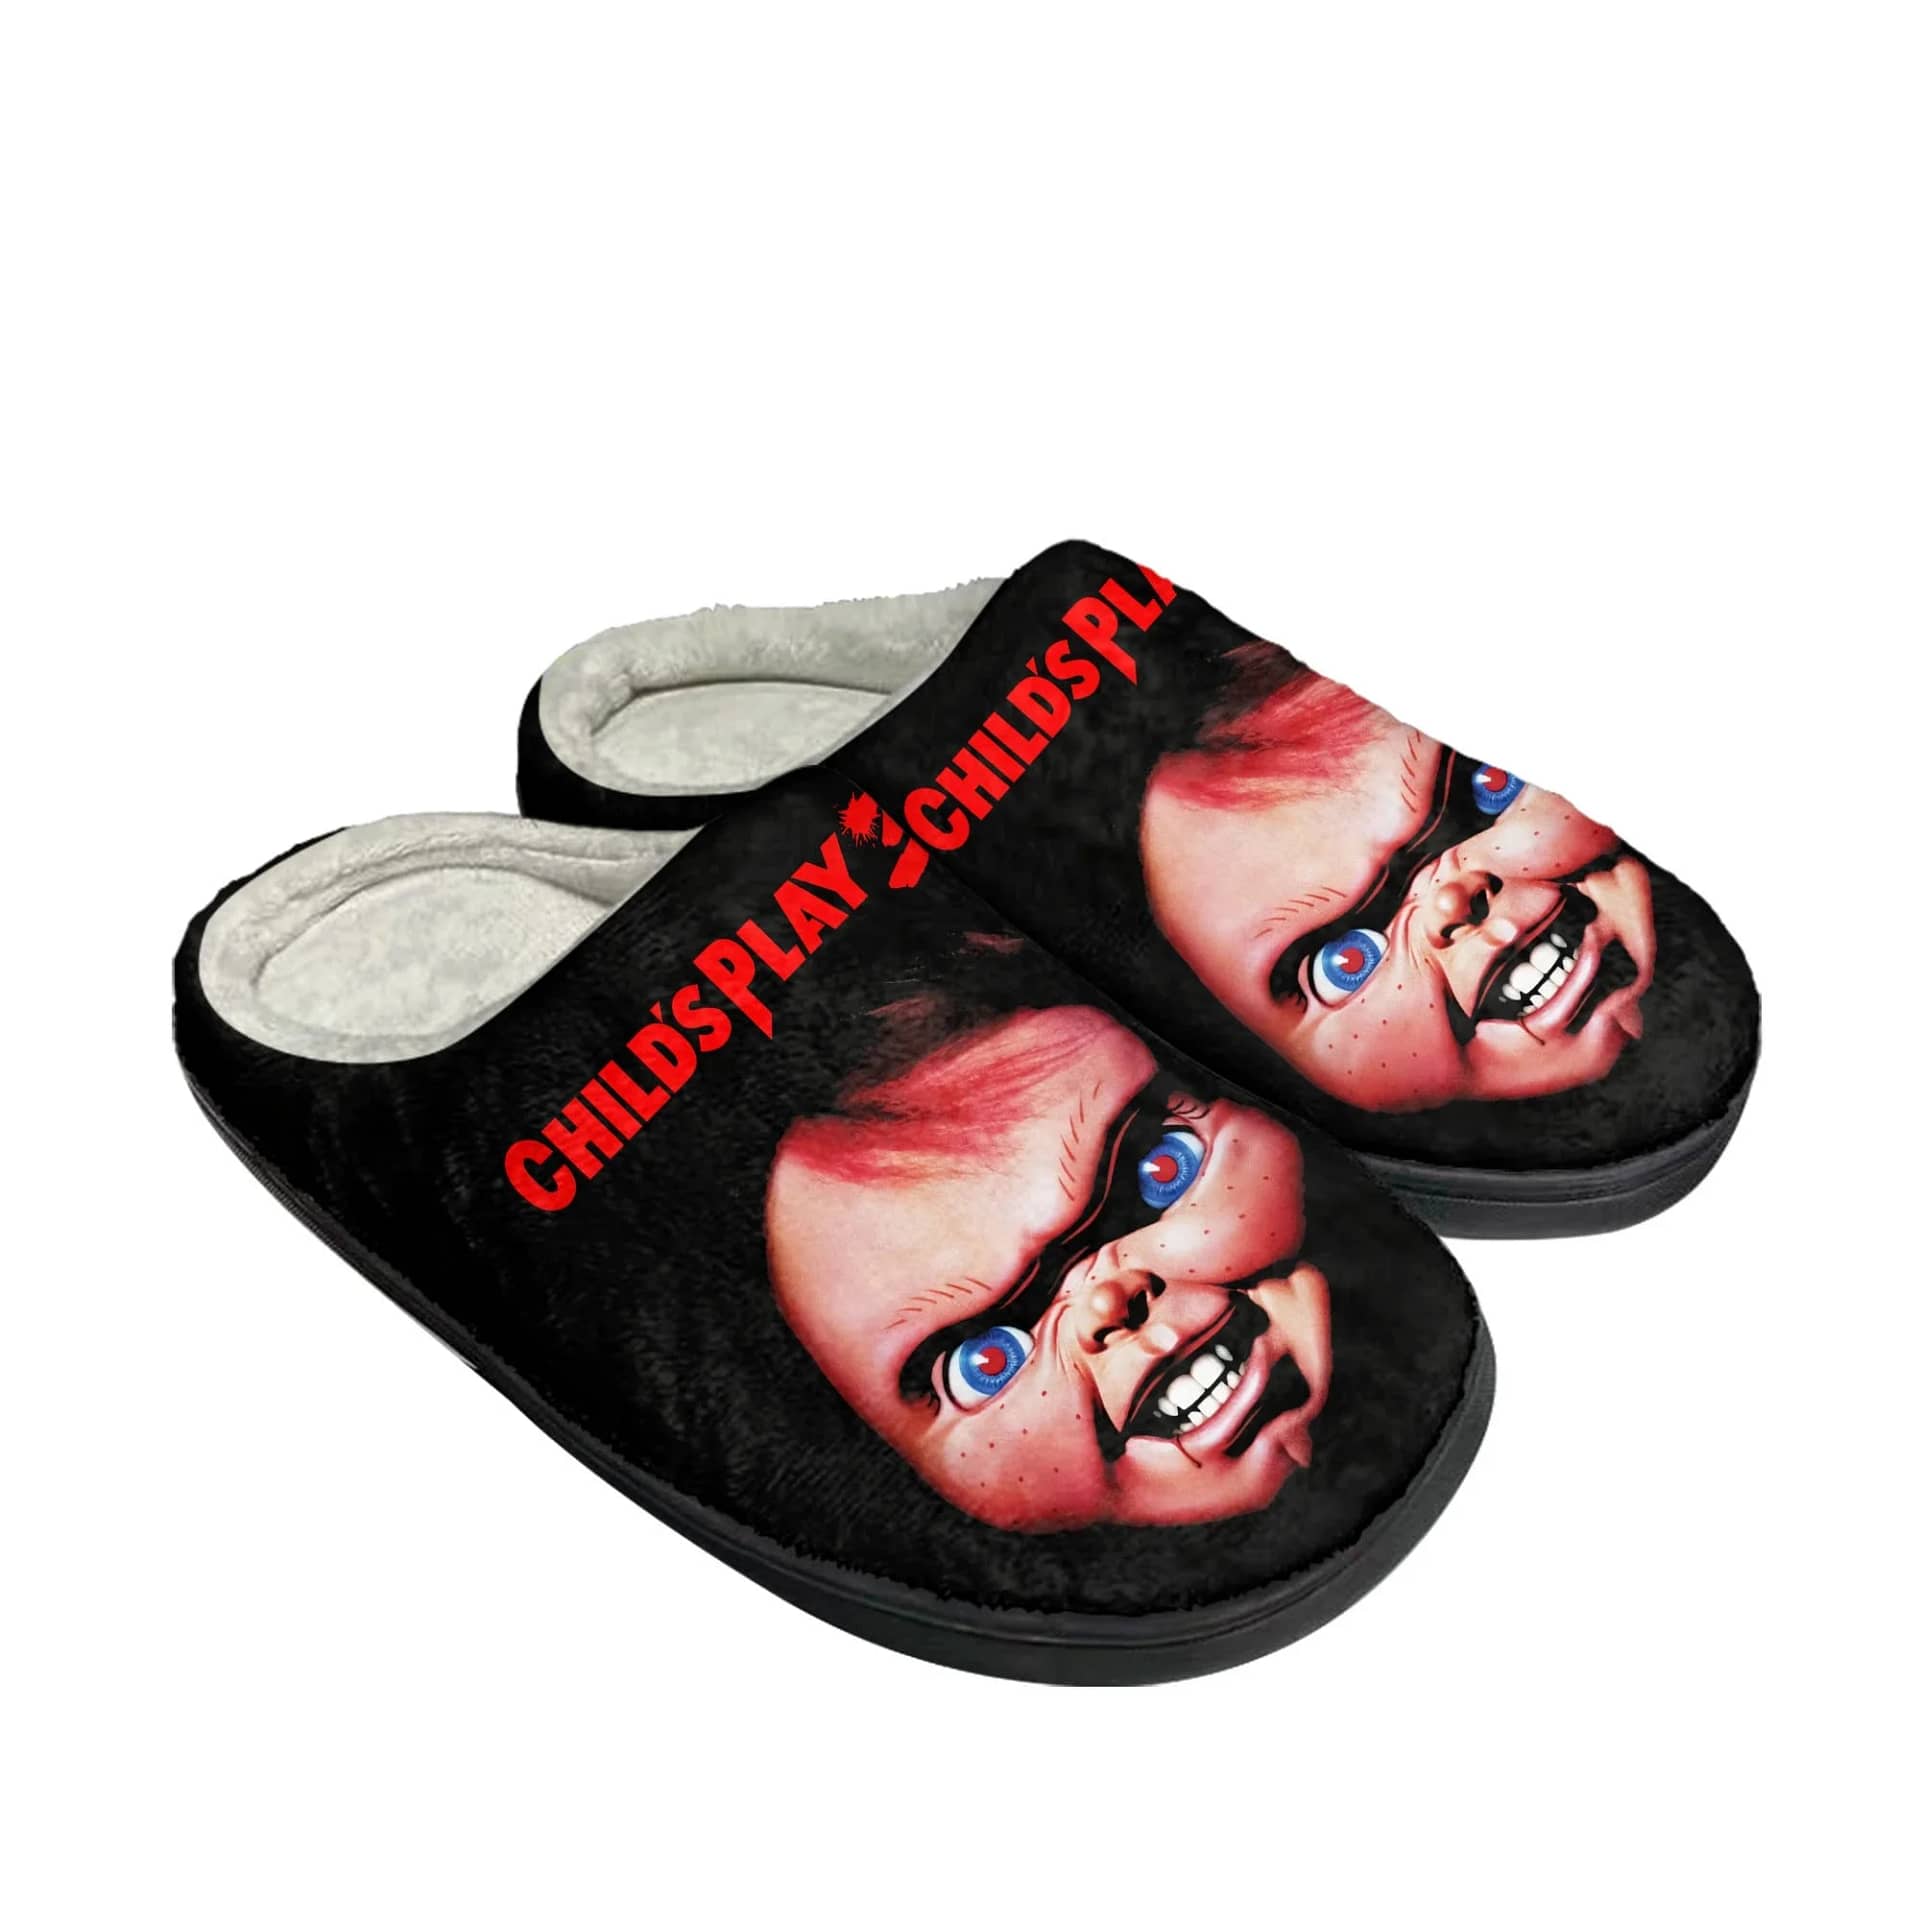 Horror Childs Play Chucky Fashion Custom Shoes Slippers